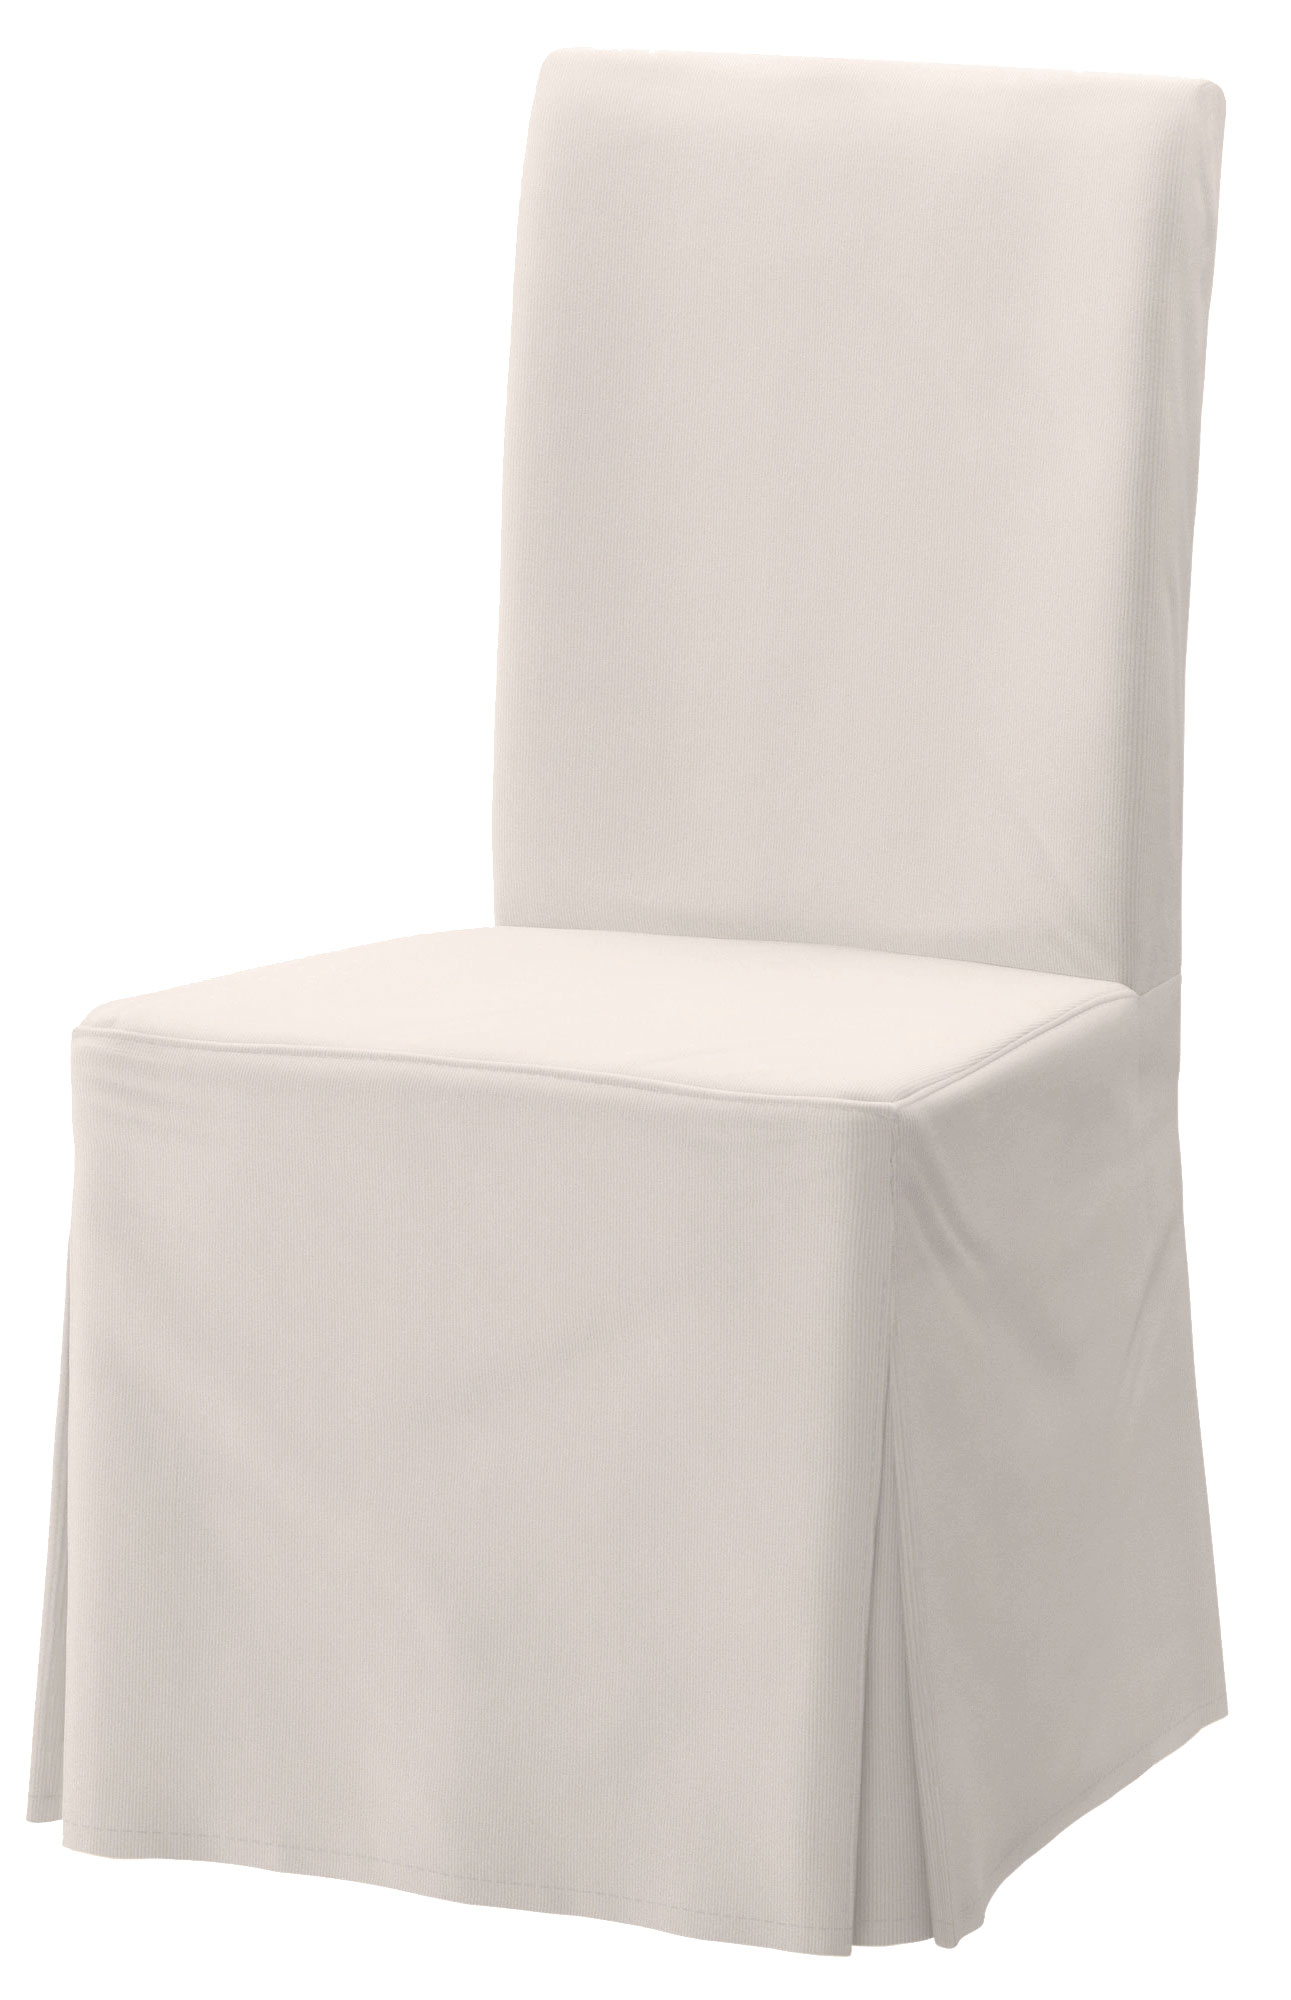 ivory chair cover